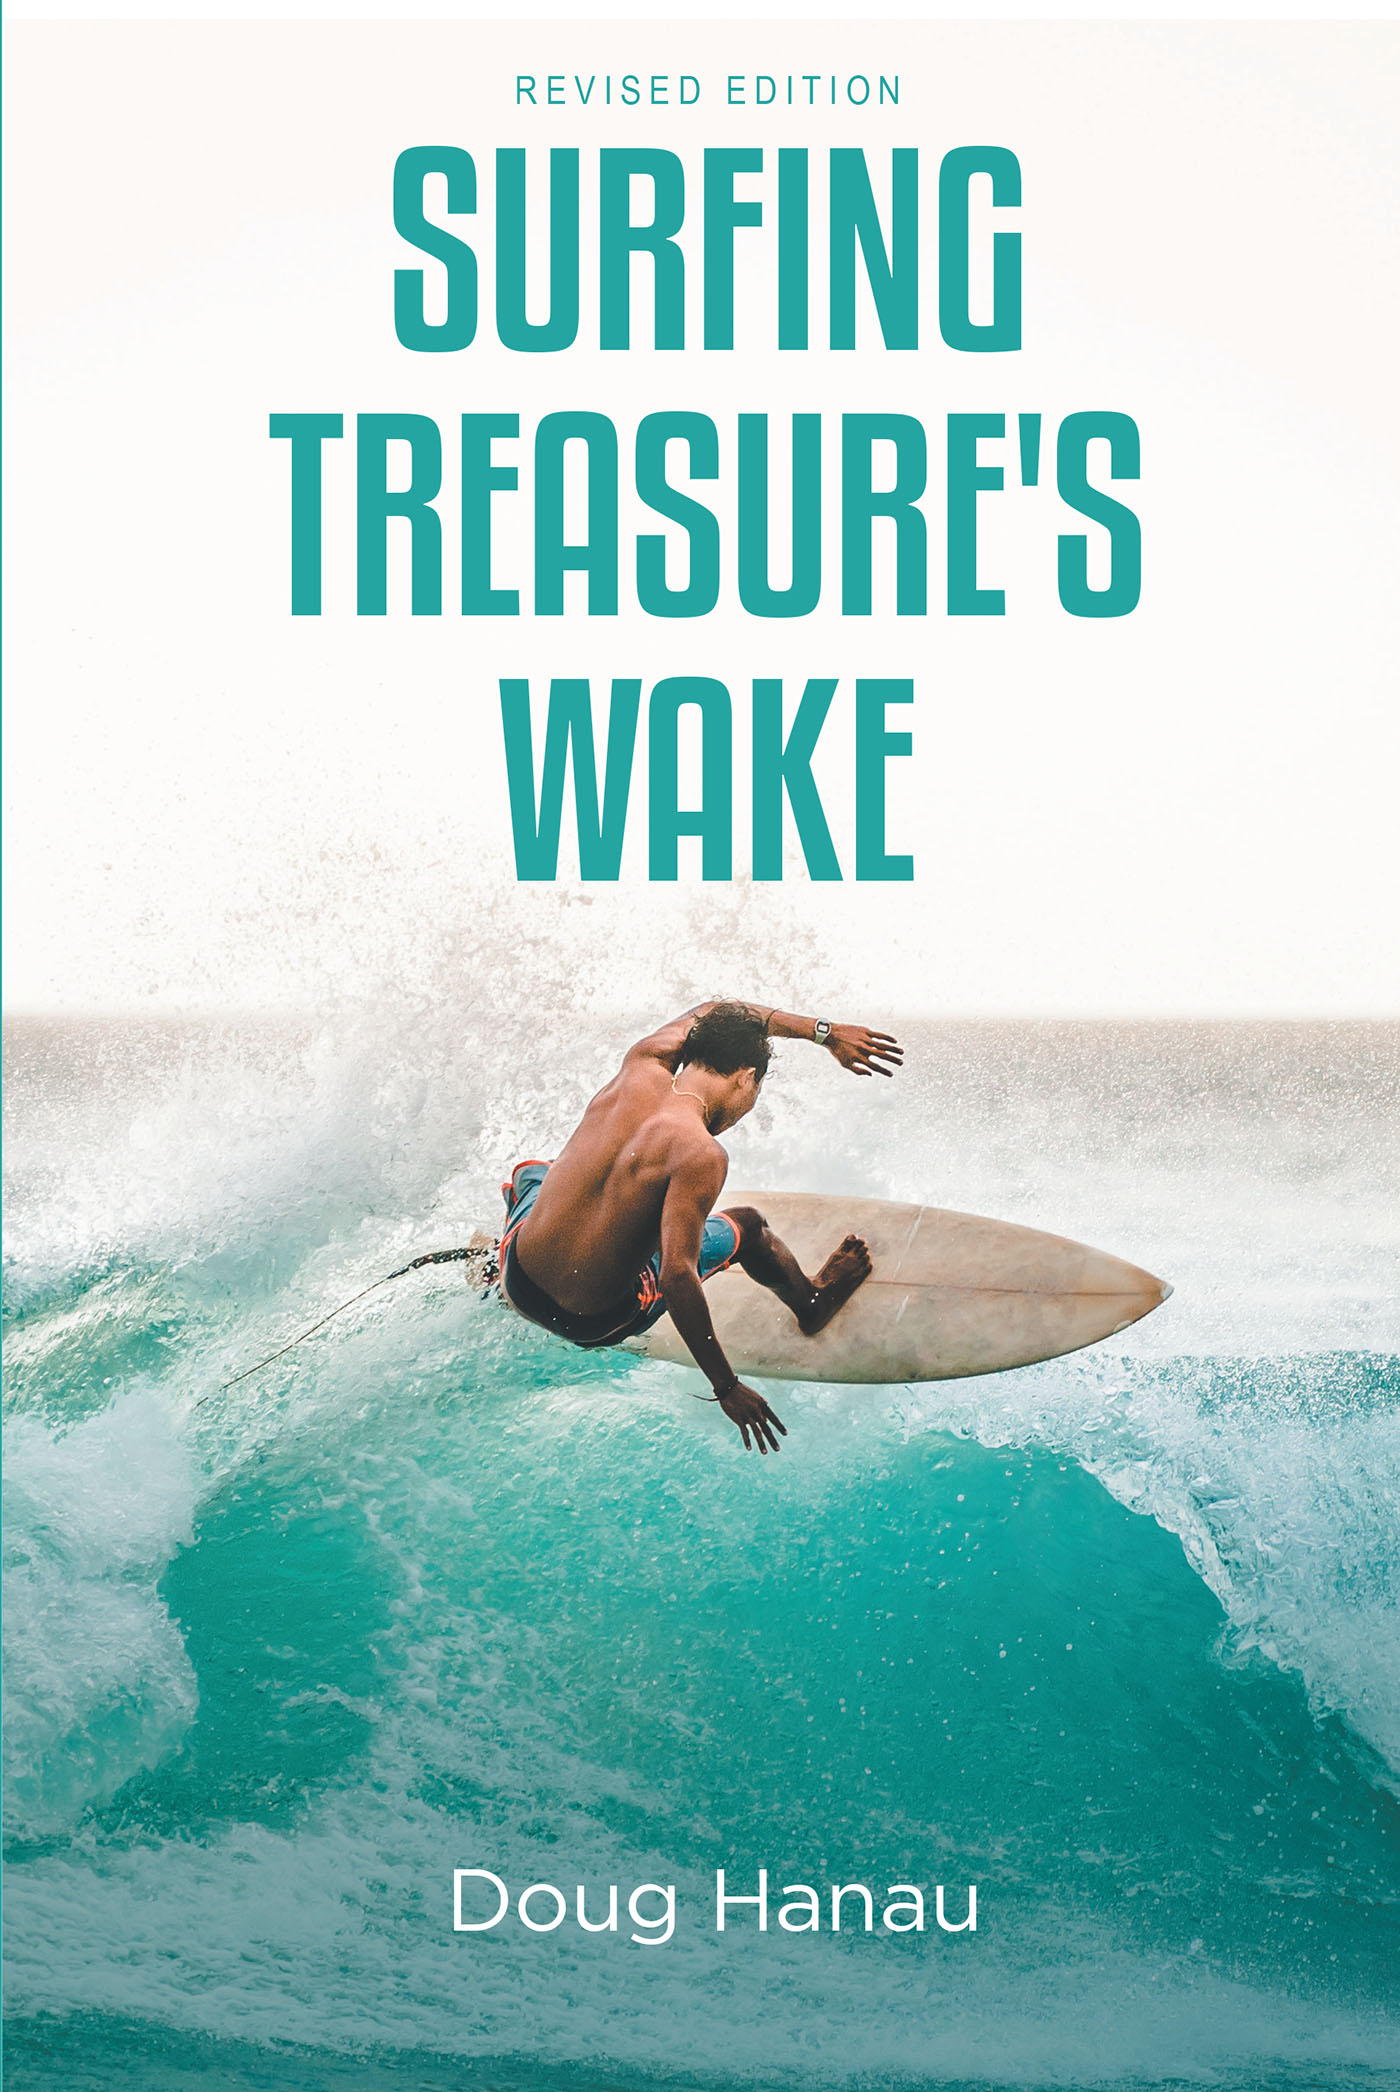 Author Doug Hanau’s New Book, "Surfing Treasure’s Wake: Revised Edition," is a Thrilling Young Adult Fiction Novel That Features Adventure, Tragedy, and the Supernatural